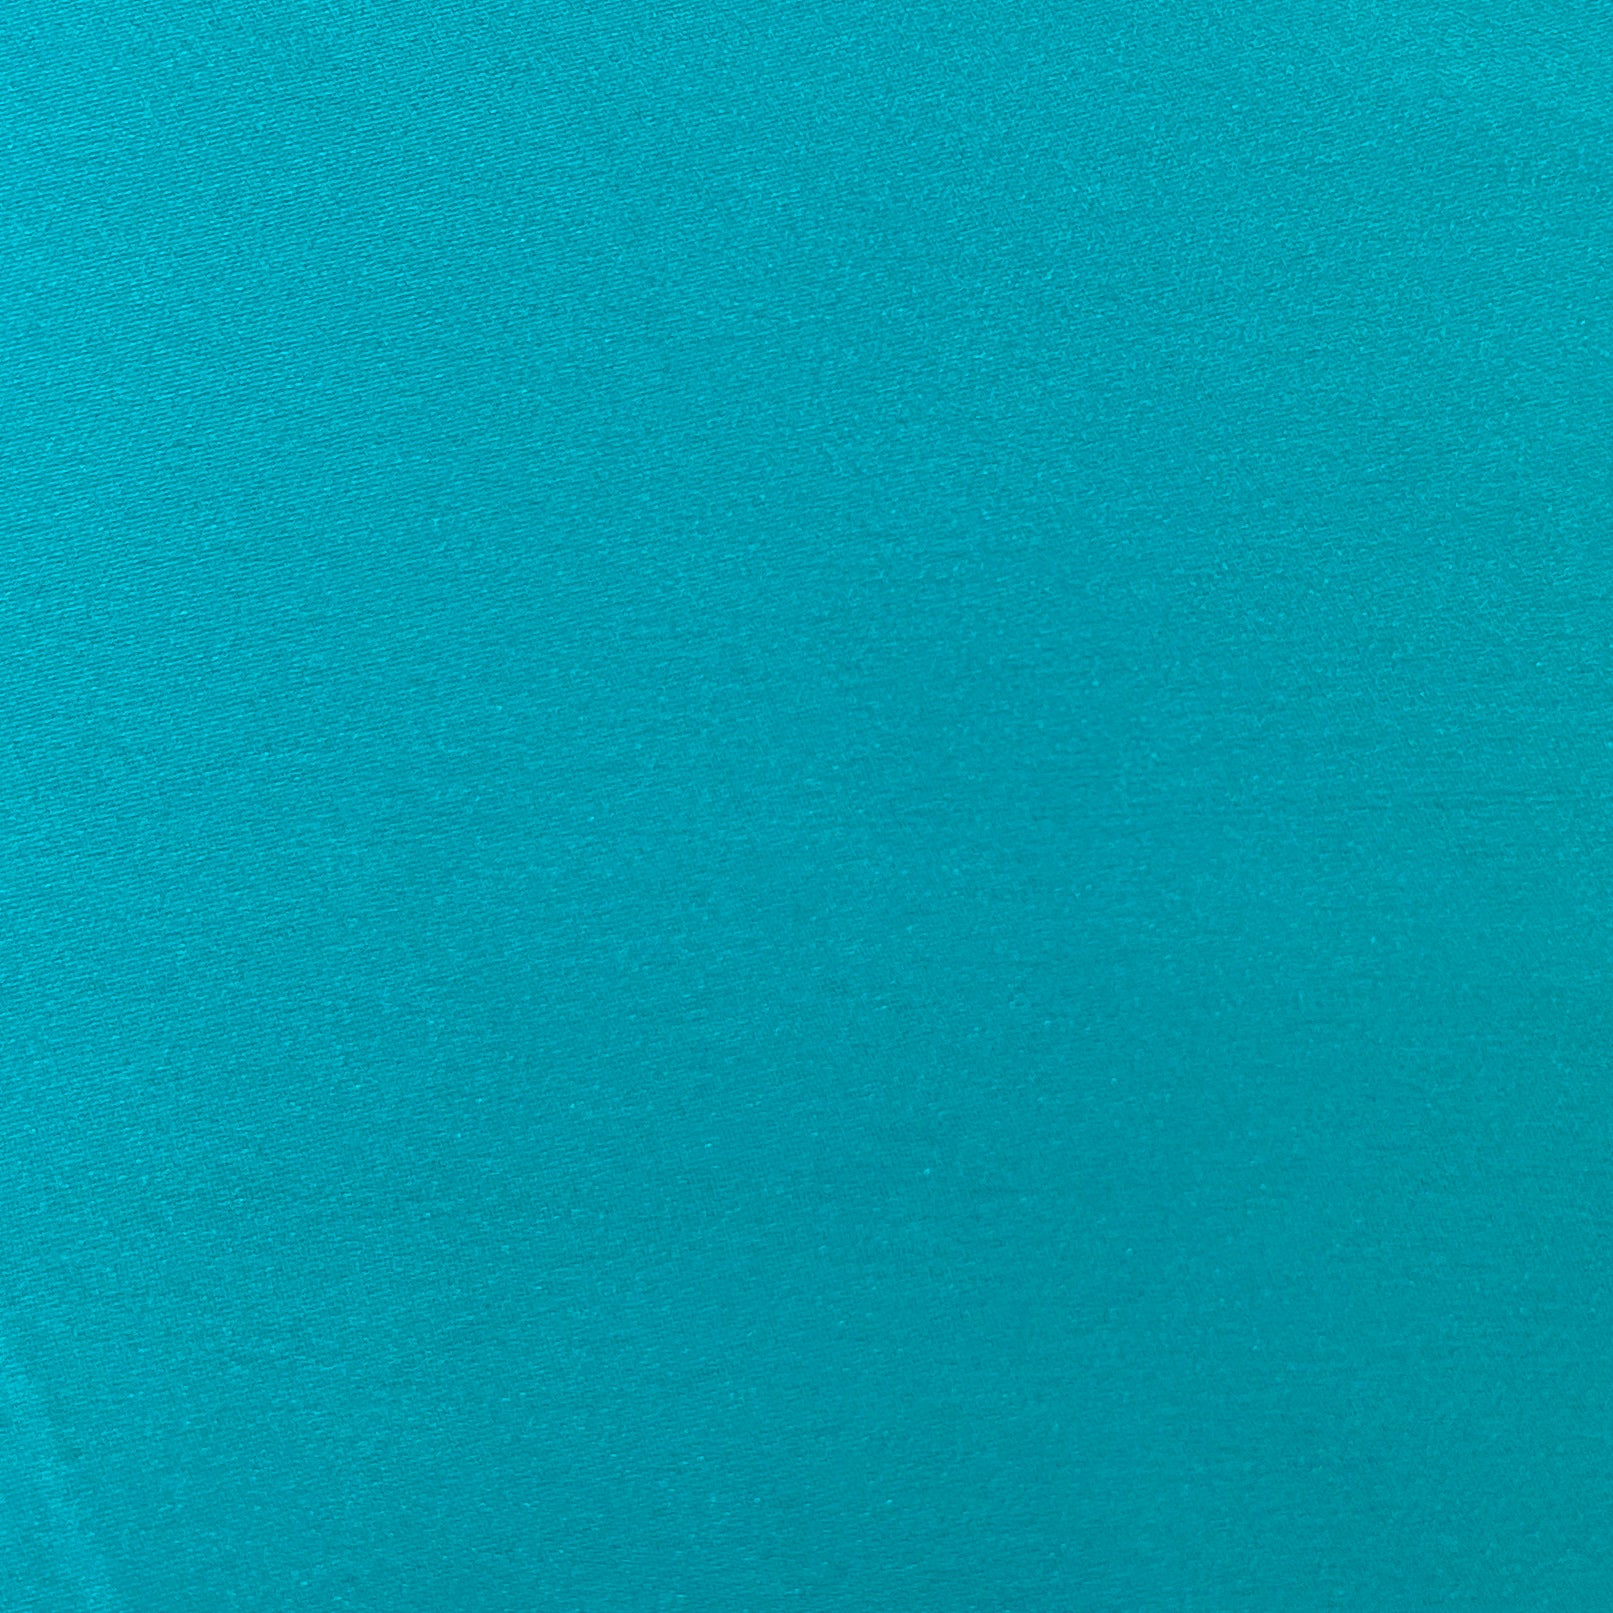 Exclusive Turquoise Green Solid Georgette Satin Fabric